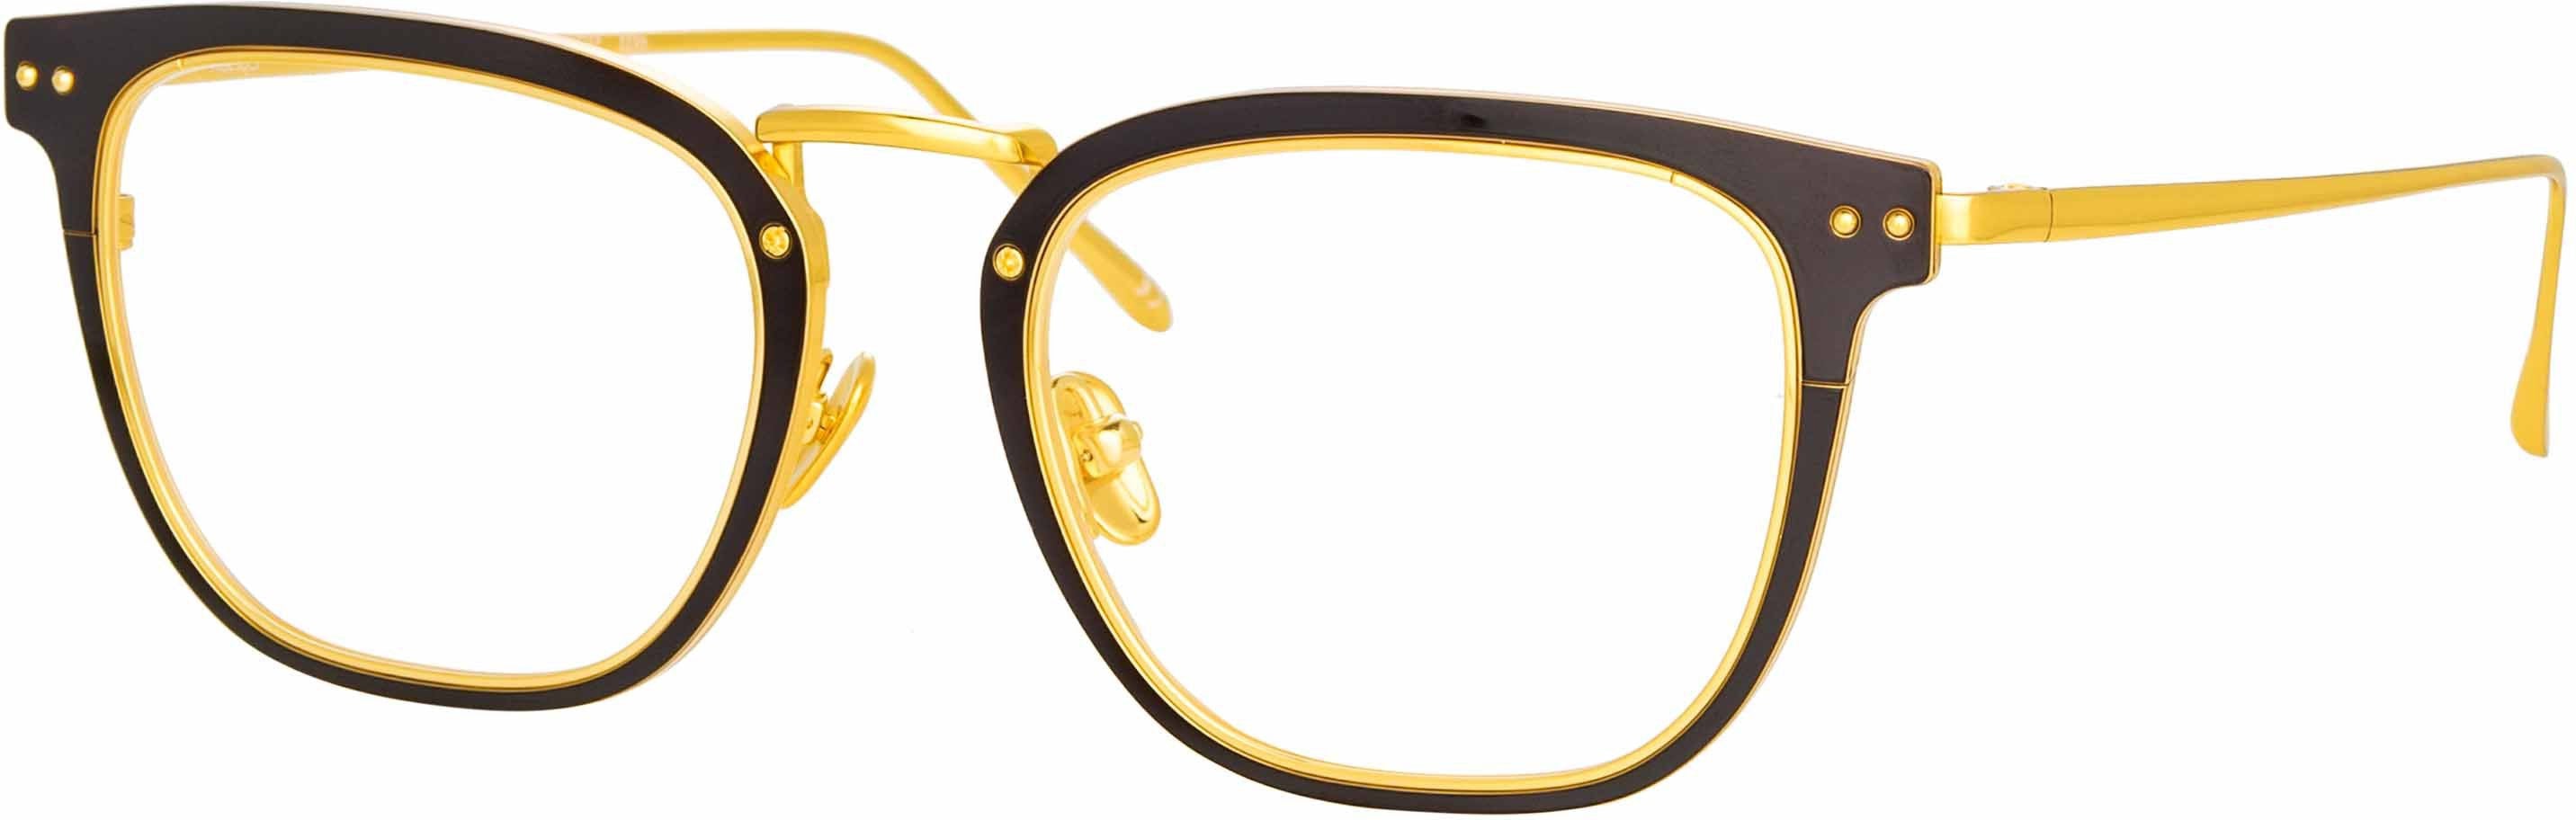 Color_LFL1114C5OPT - Carson Optical D-Frame in Yellow Gold and Black